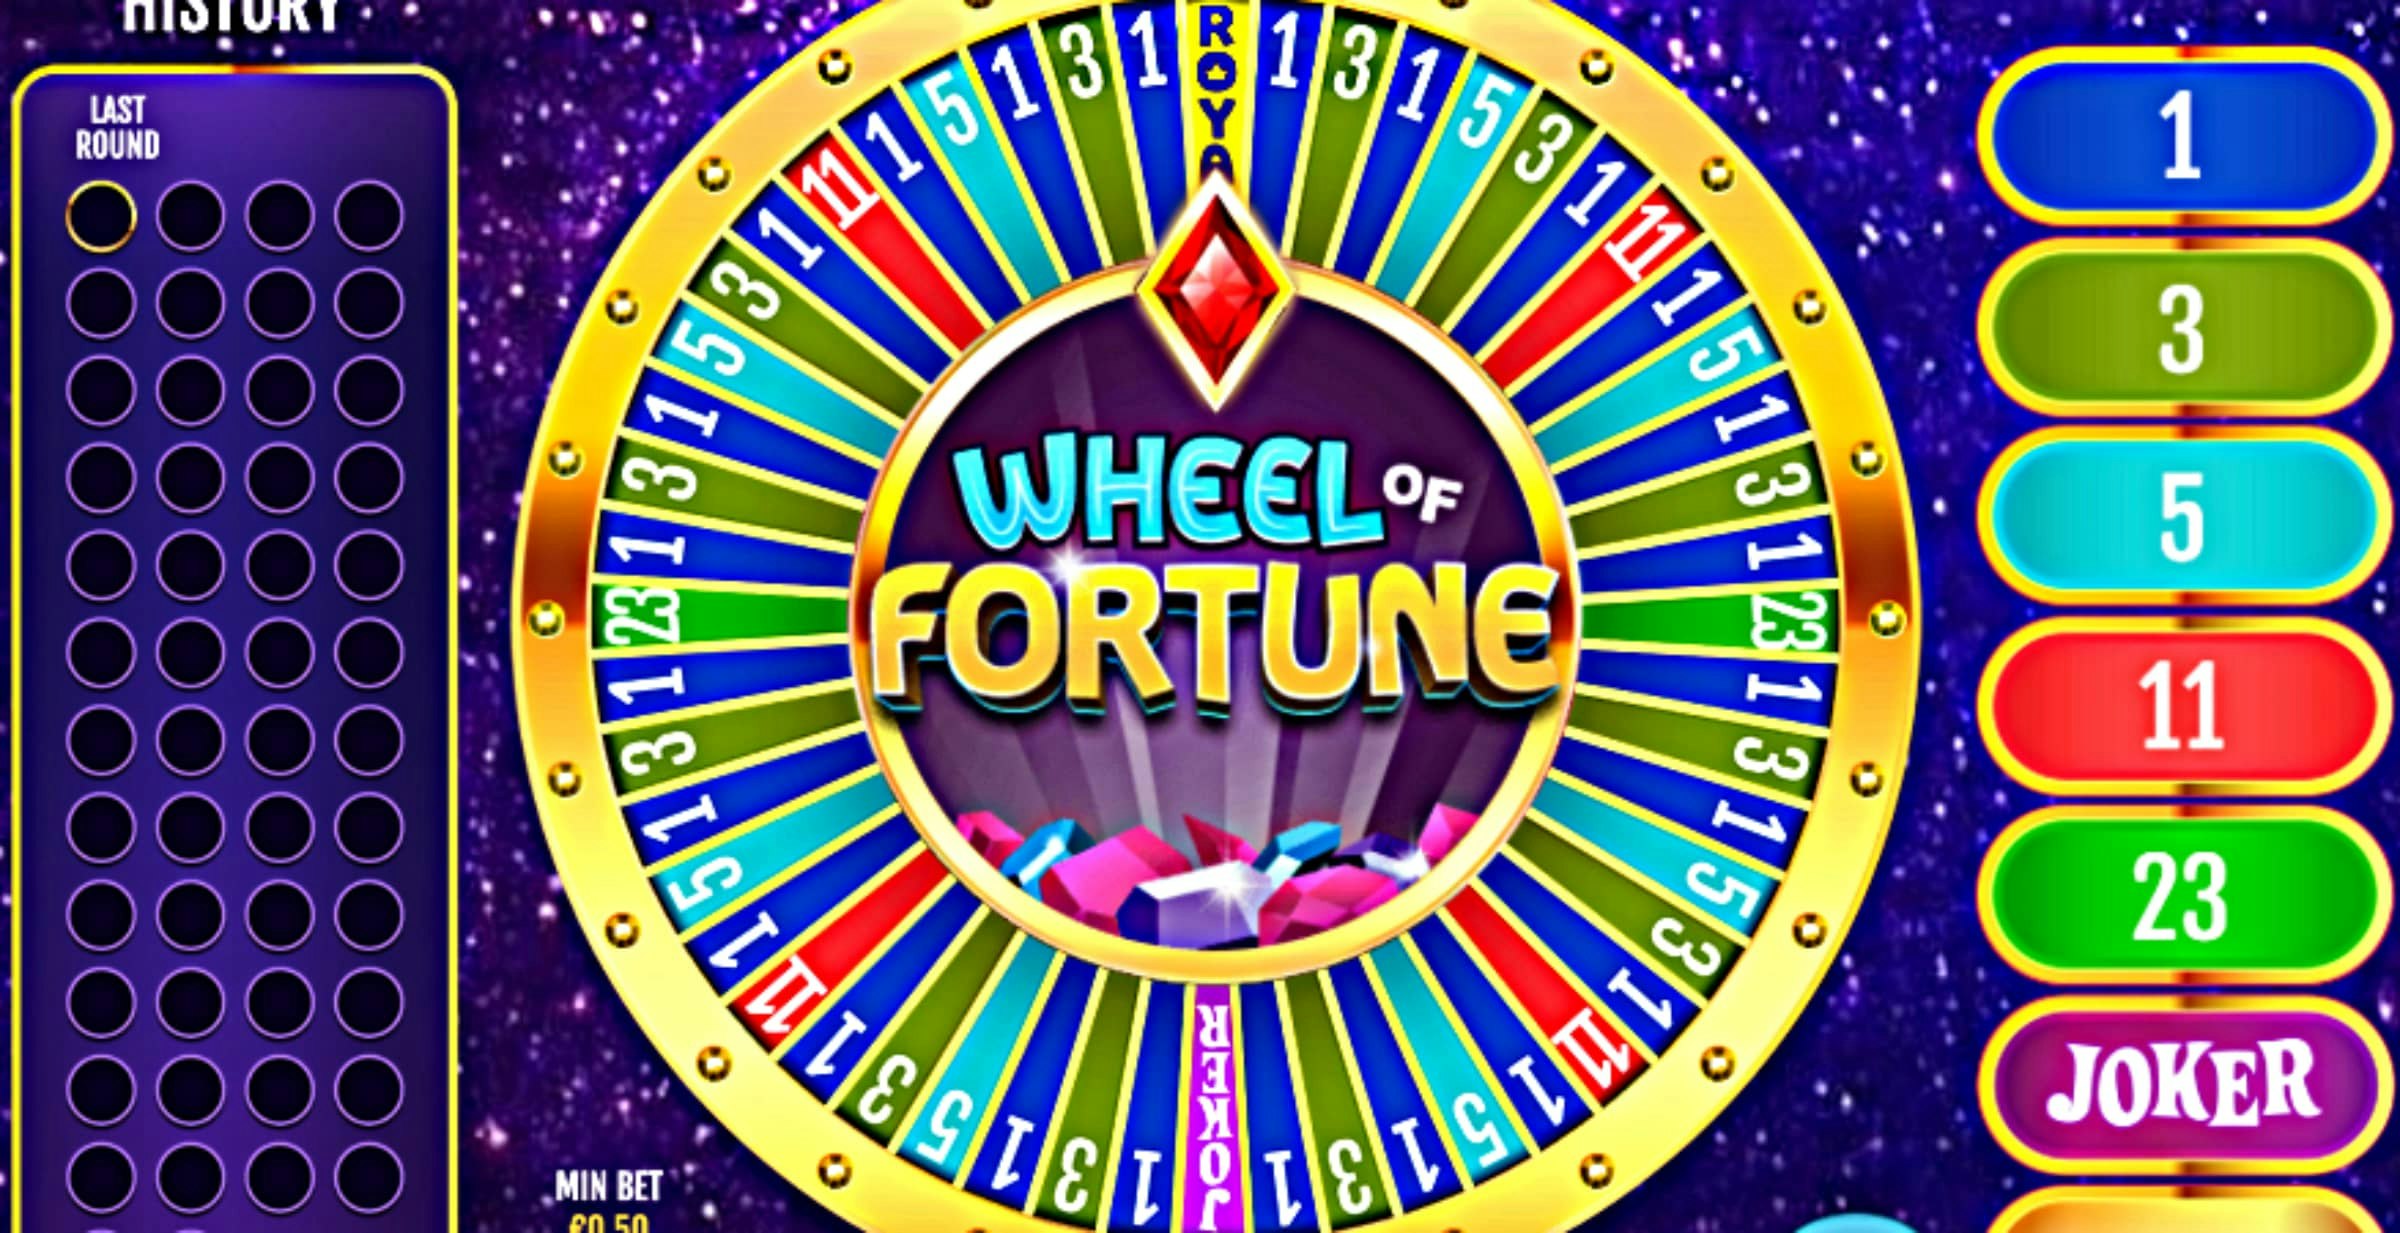 How to play and win Wheel of Fortune